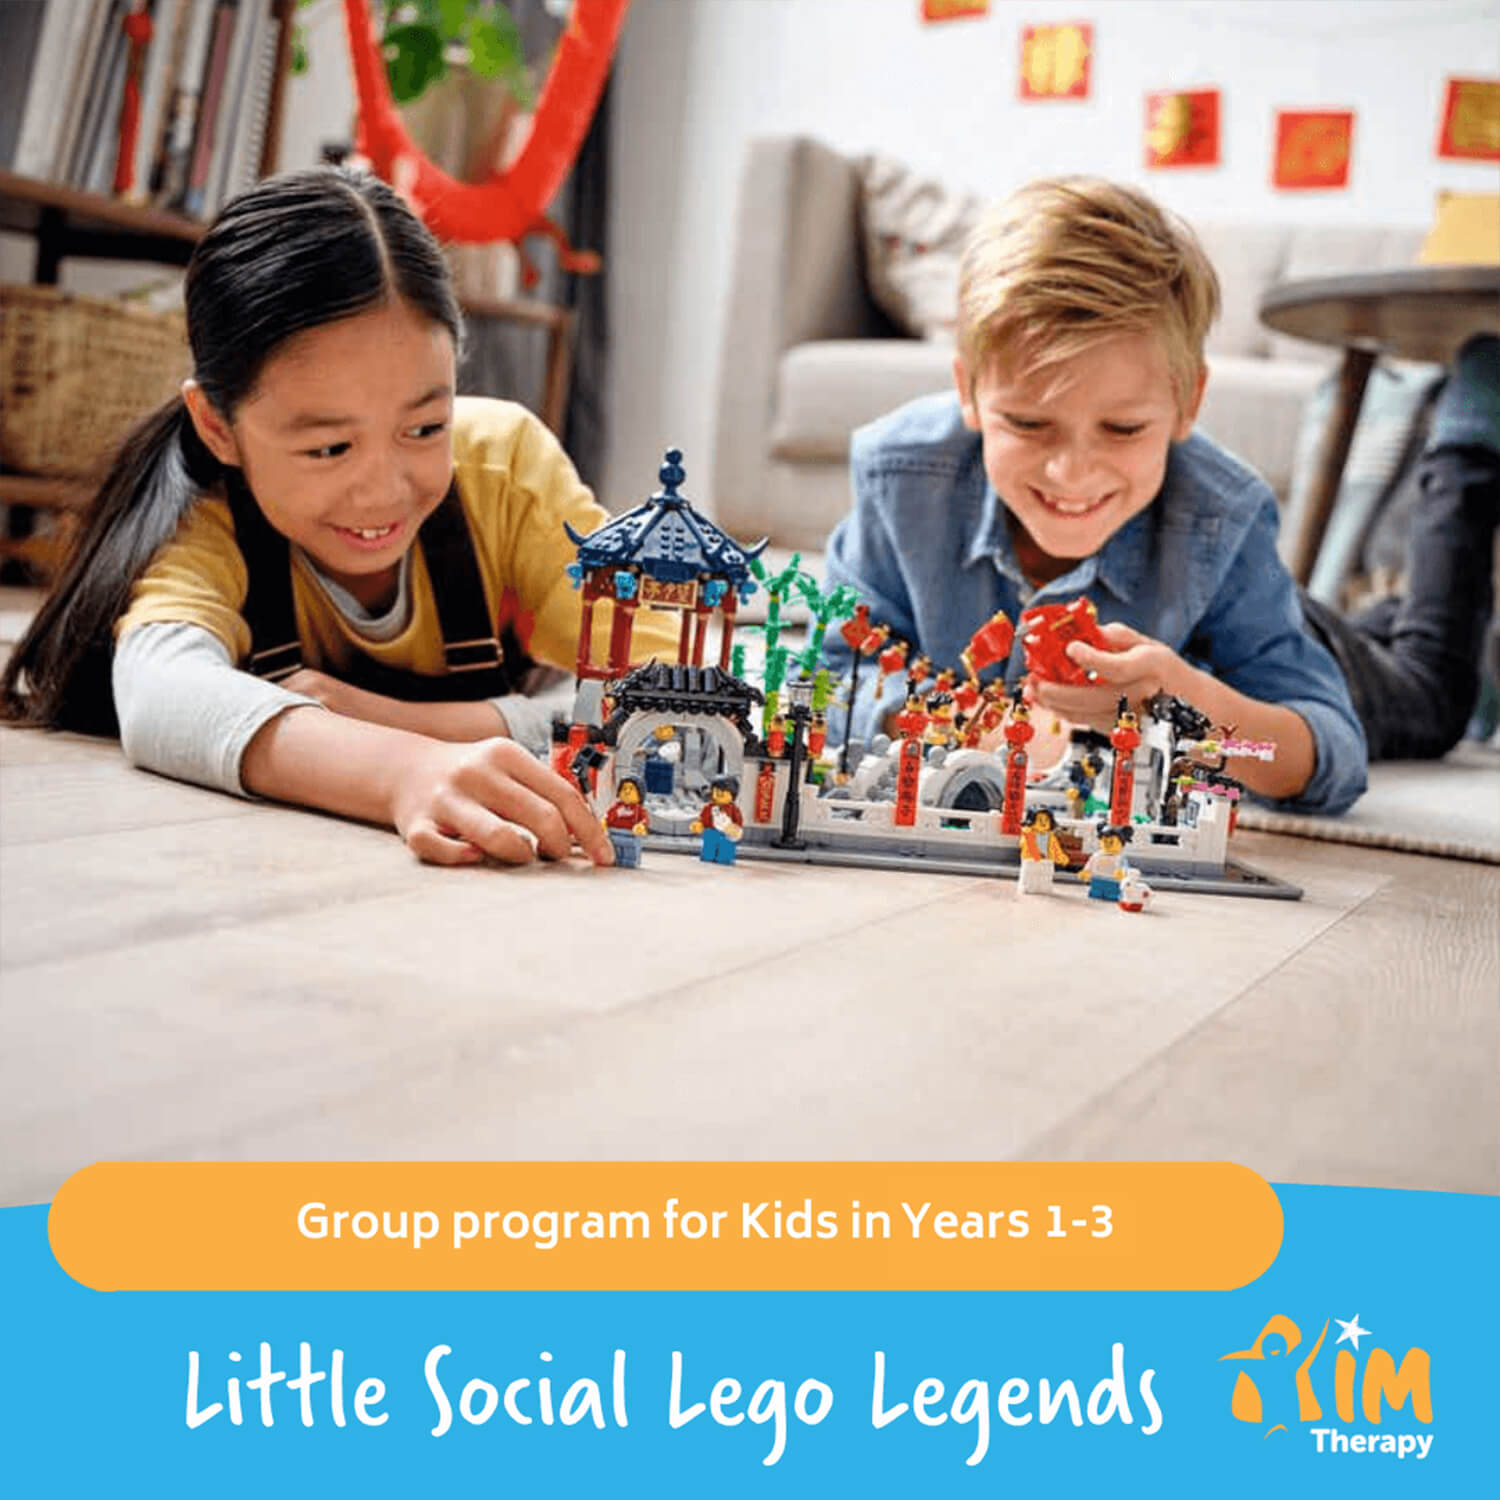 Little Social Lego Legends AIM Therapy for Children